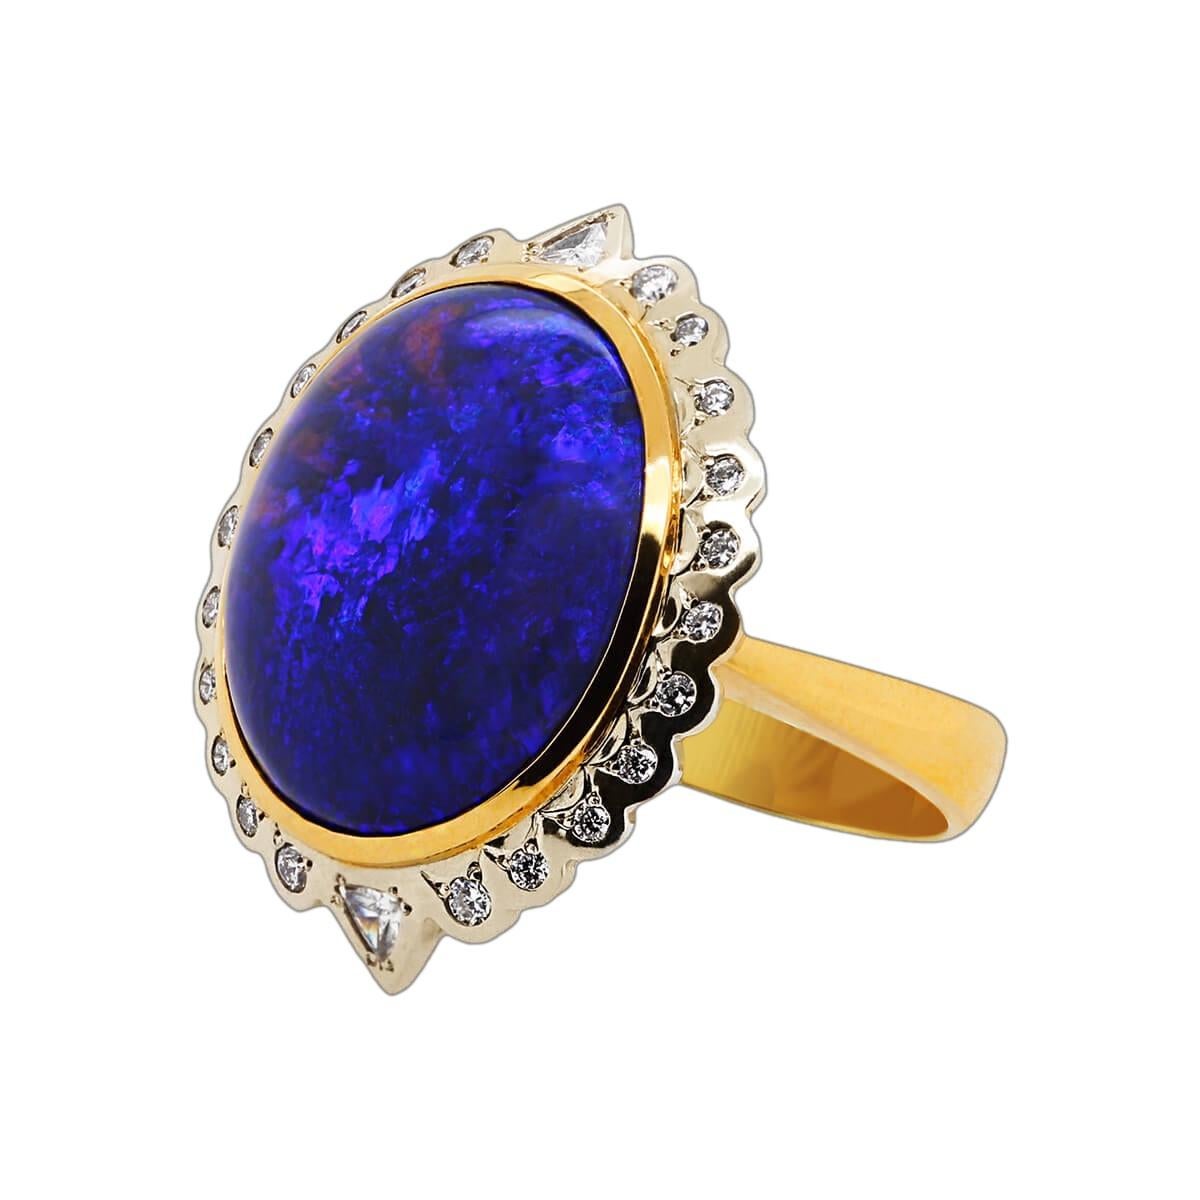 Some rings are cute, others are elegant, but some are meant for a queen. A black opal direct from the mysterious outback of Australia, surrounded by brilliant white diamonds in a platinum and 18K solid gold setting. The ring of elegance awaits you,